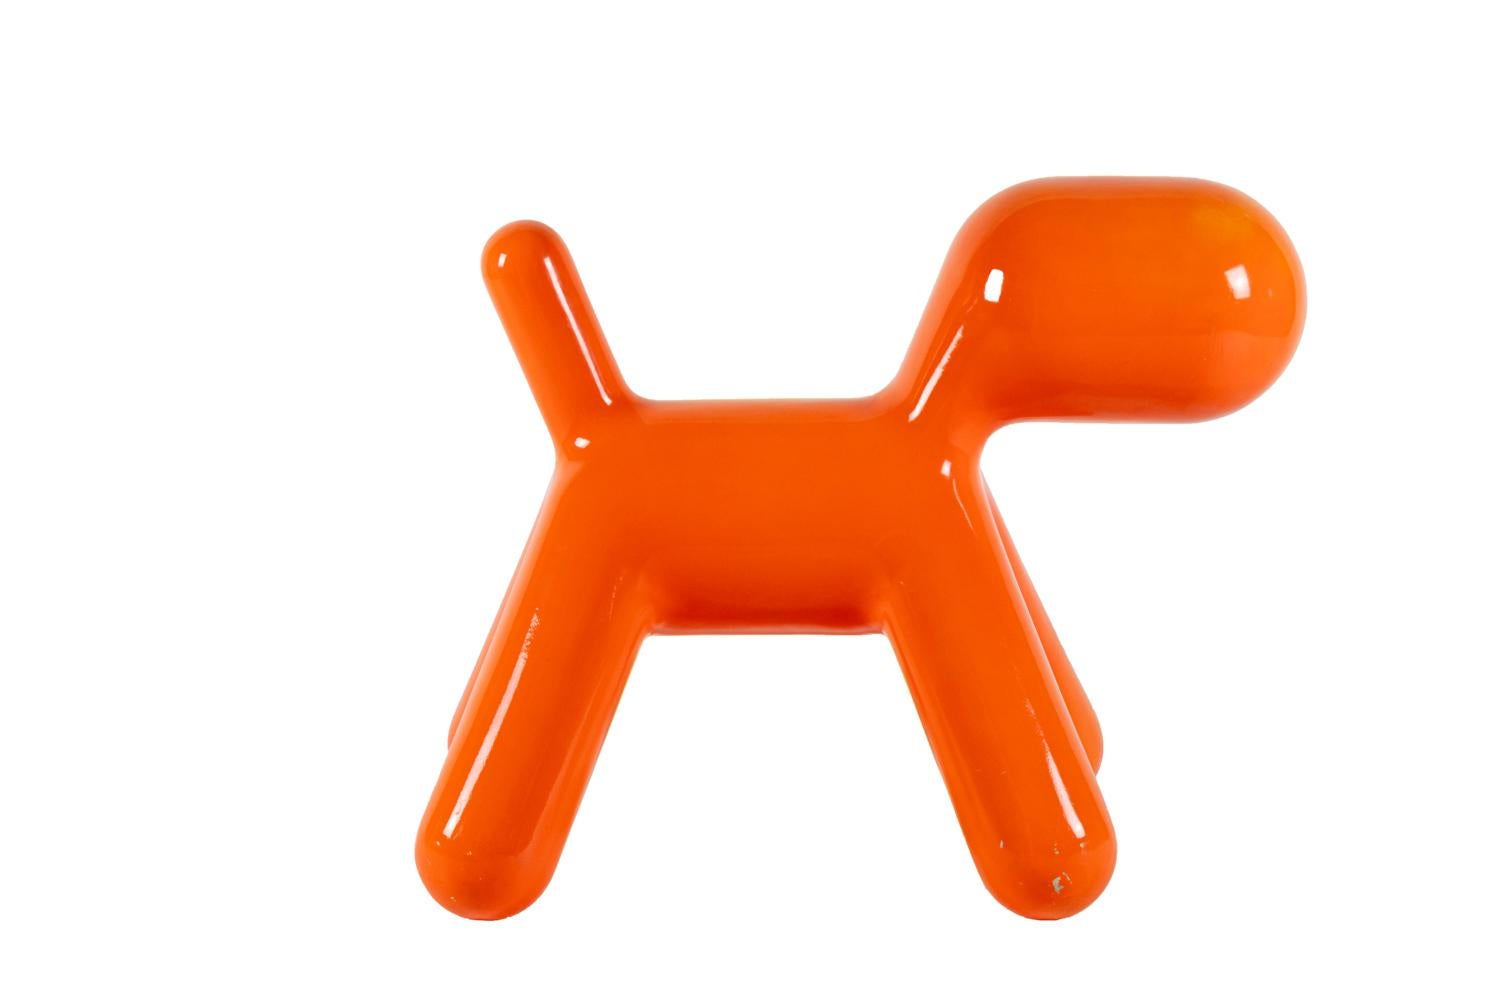 Eero Aarnio for Magis, attributed to.
“Puppy” sculpture figuring a stylized dog in orange molded polyethylene.

Work realized in 2005, ongoing production.

Eero Aarnio (1932) is a Finnish designer. After studying at the School for Art and